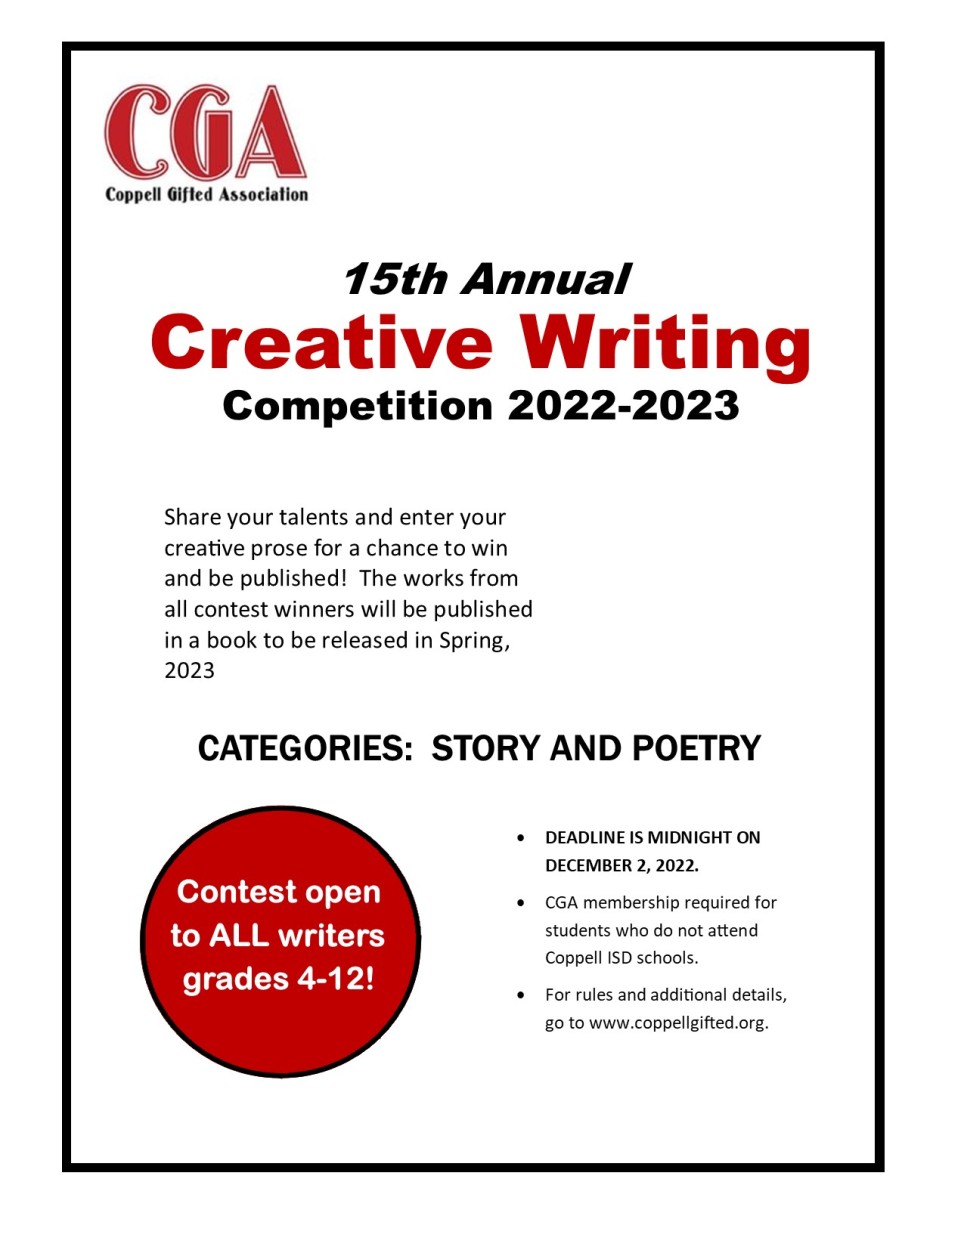 20222023 Creative Writing Competition Coppell Gifted Association